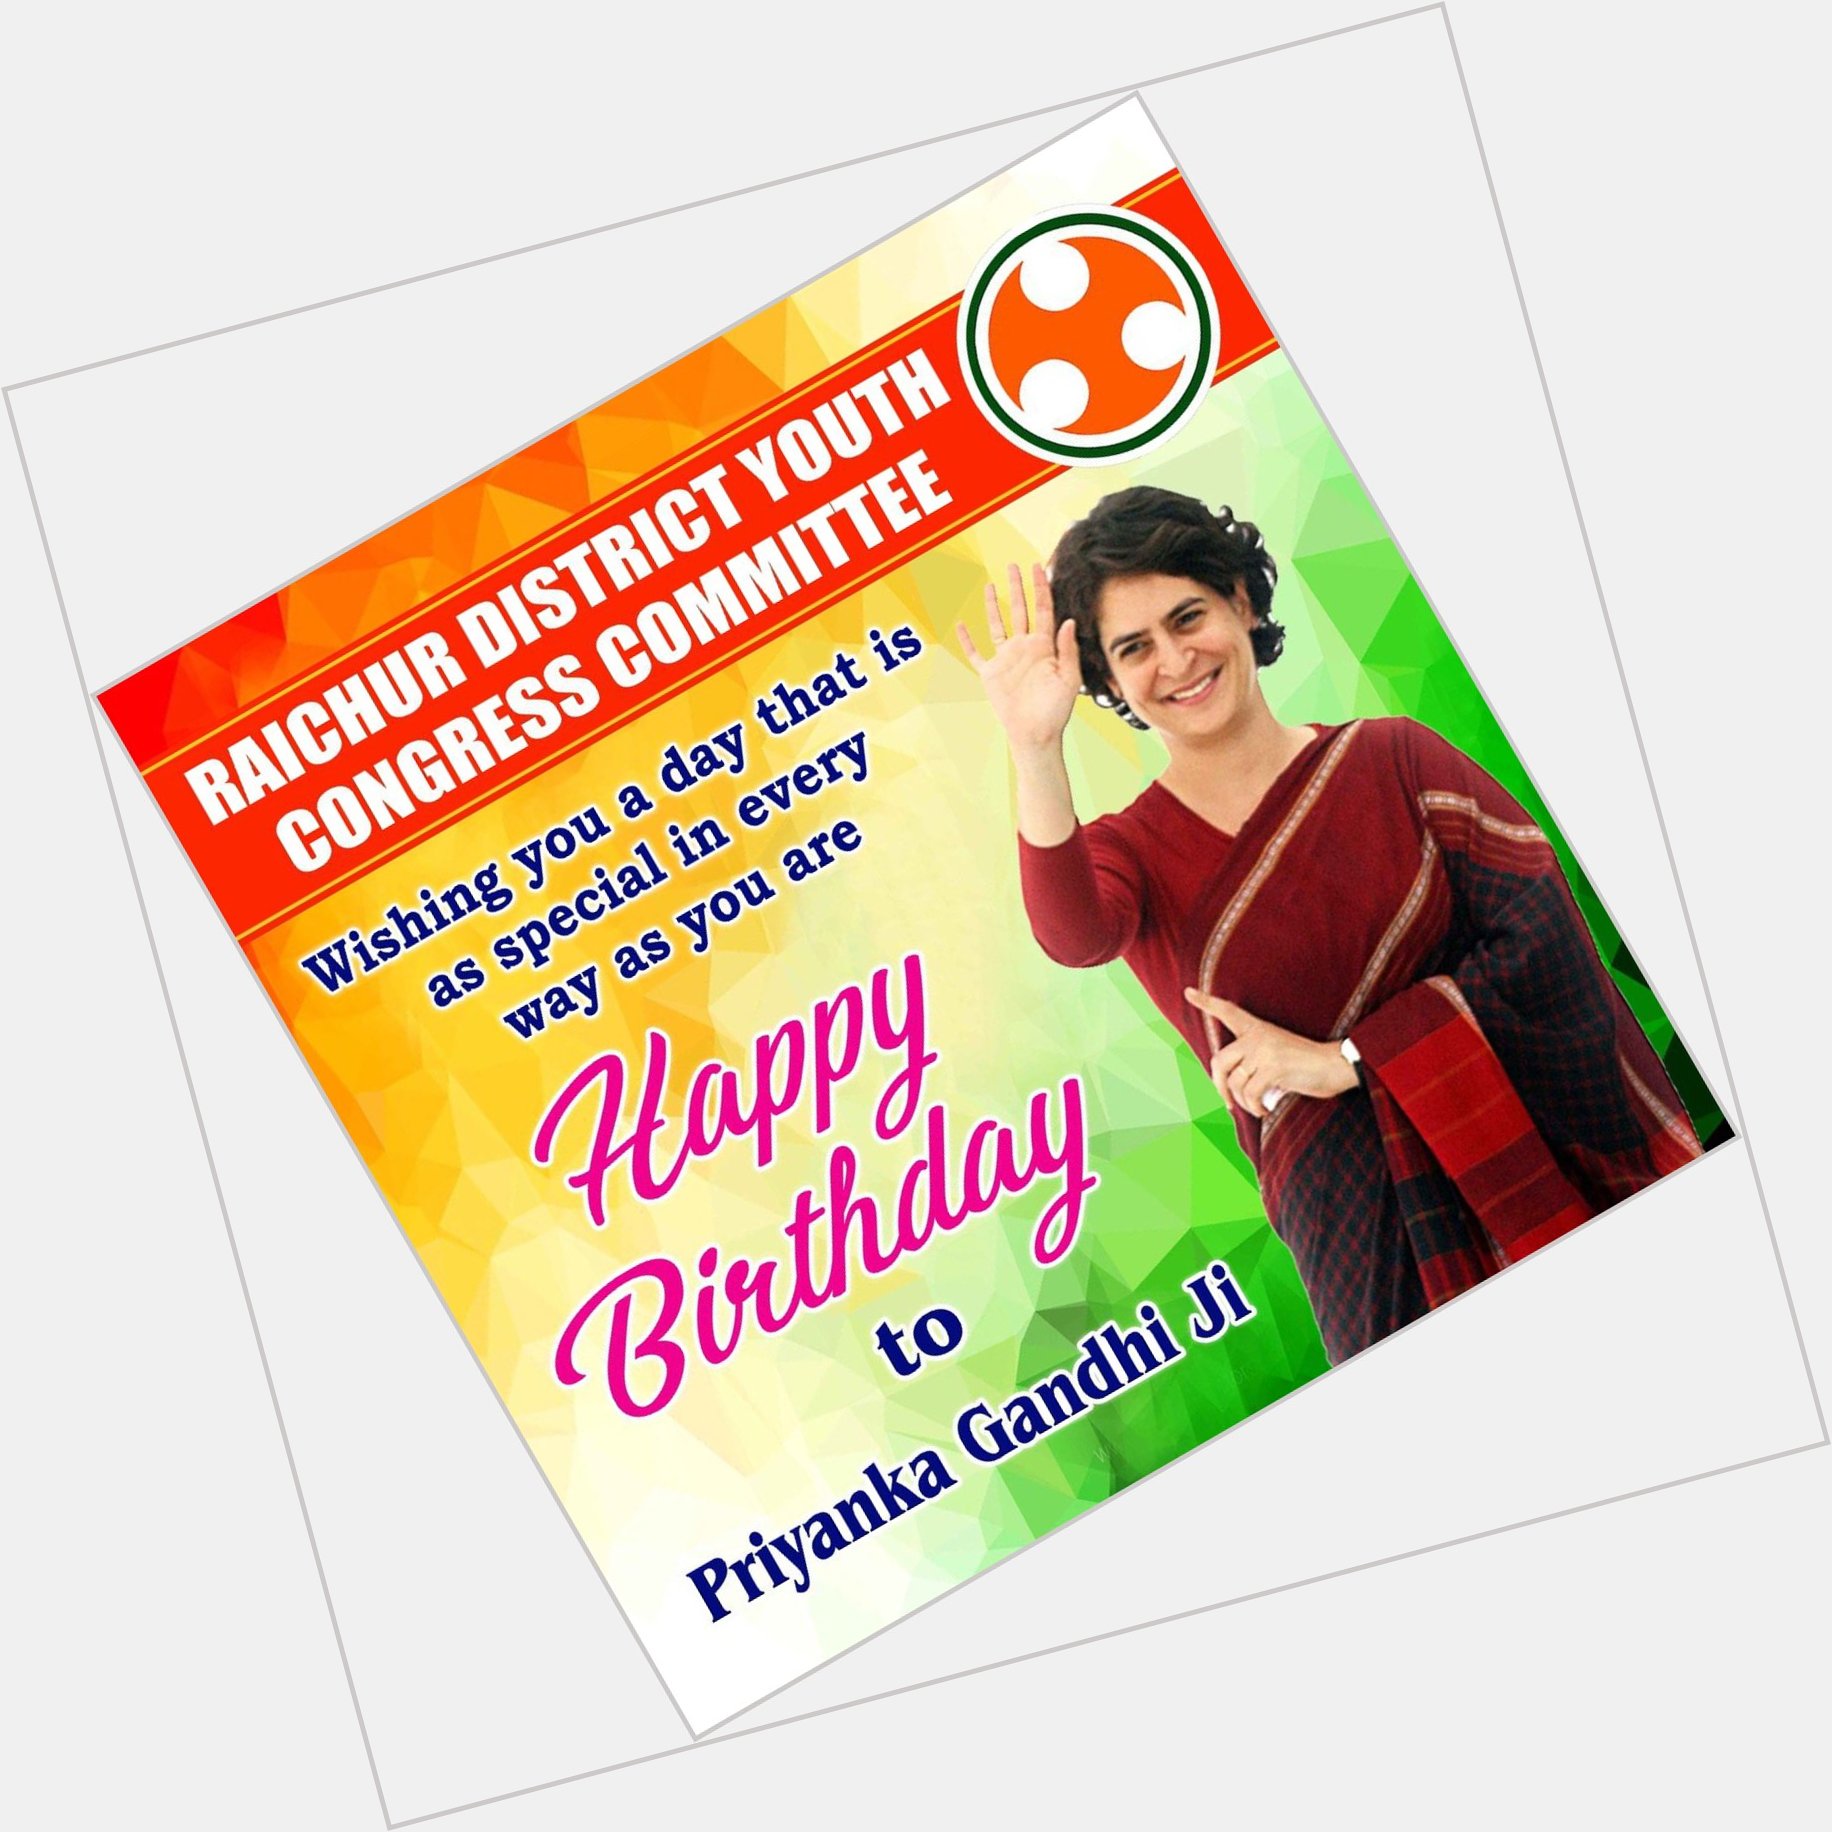 Wishes to Priyanka Gandhi a Very Happy Birthday! May the almighty bless you, always.. 